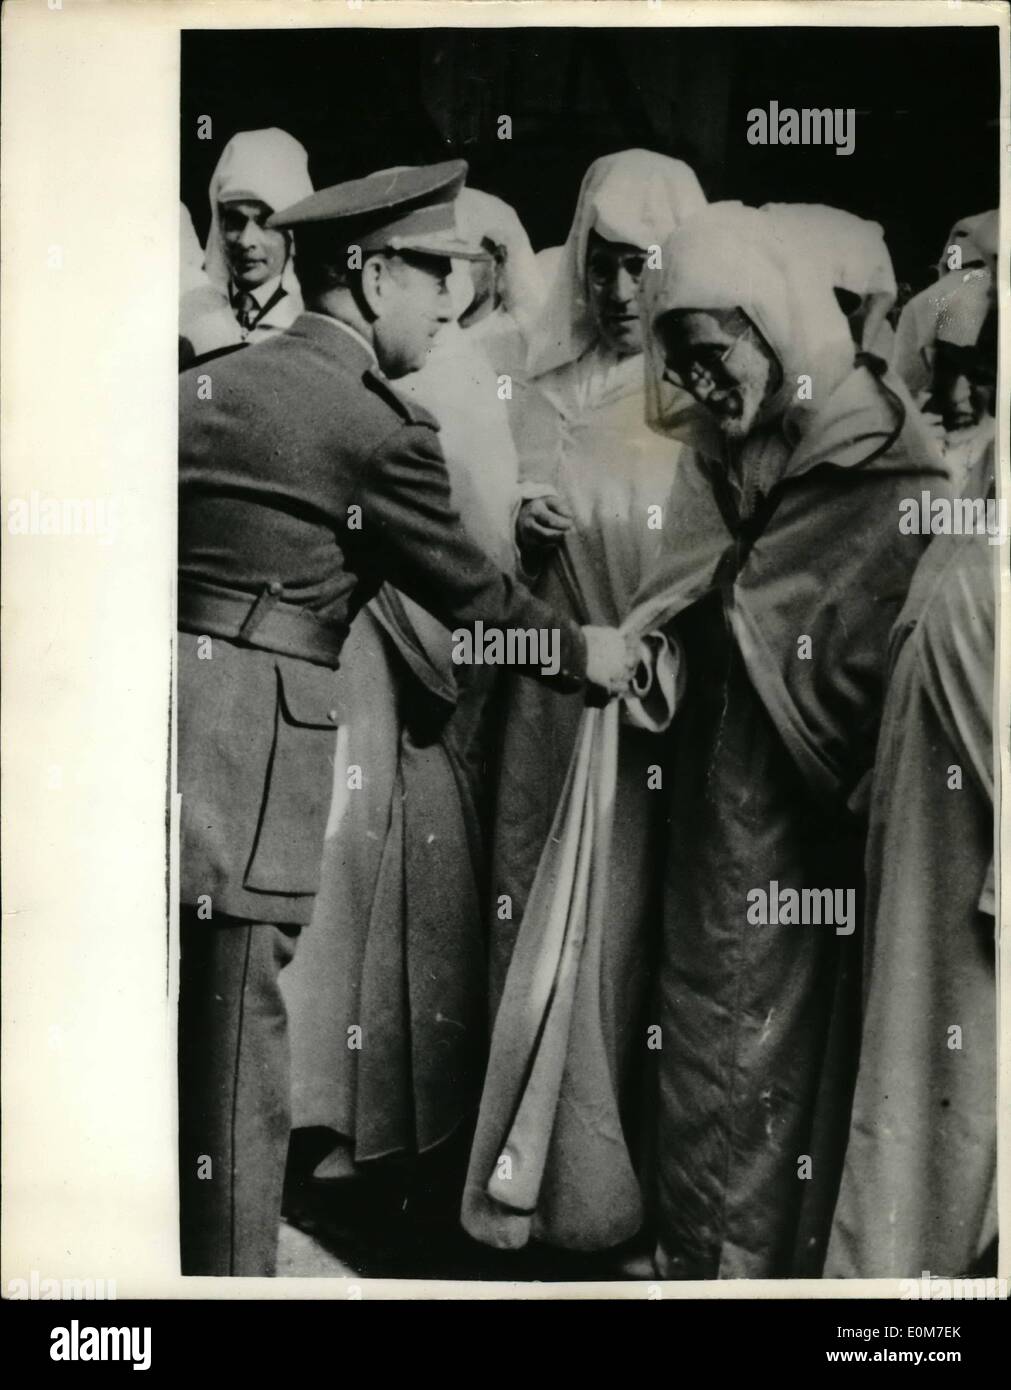 Jan. 01, 1954 - Demonstration In Streets Of Tetuan - Spanish Morocco...Protest Against Deposition On Sultan: Photo Shows Lieut Gen. Garcia Valino seen as he shakes hands with the Ulemas, Caids and Pashas who attended the gathering in the streets of Totuan, Spanish Morocco recently.They asked for ''Temporary Separation from French Morocco'' and full advertising for her Caliph Muley Hassan Under Spanish Protection.The demonstration was in protest against the deposing by the French of the Sultan Mohammed ben Yussef in favour of Sidi Mohammed Ben Arafa. Stock Photo